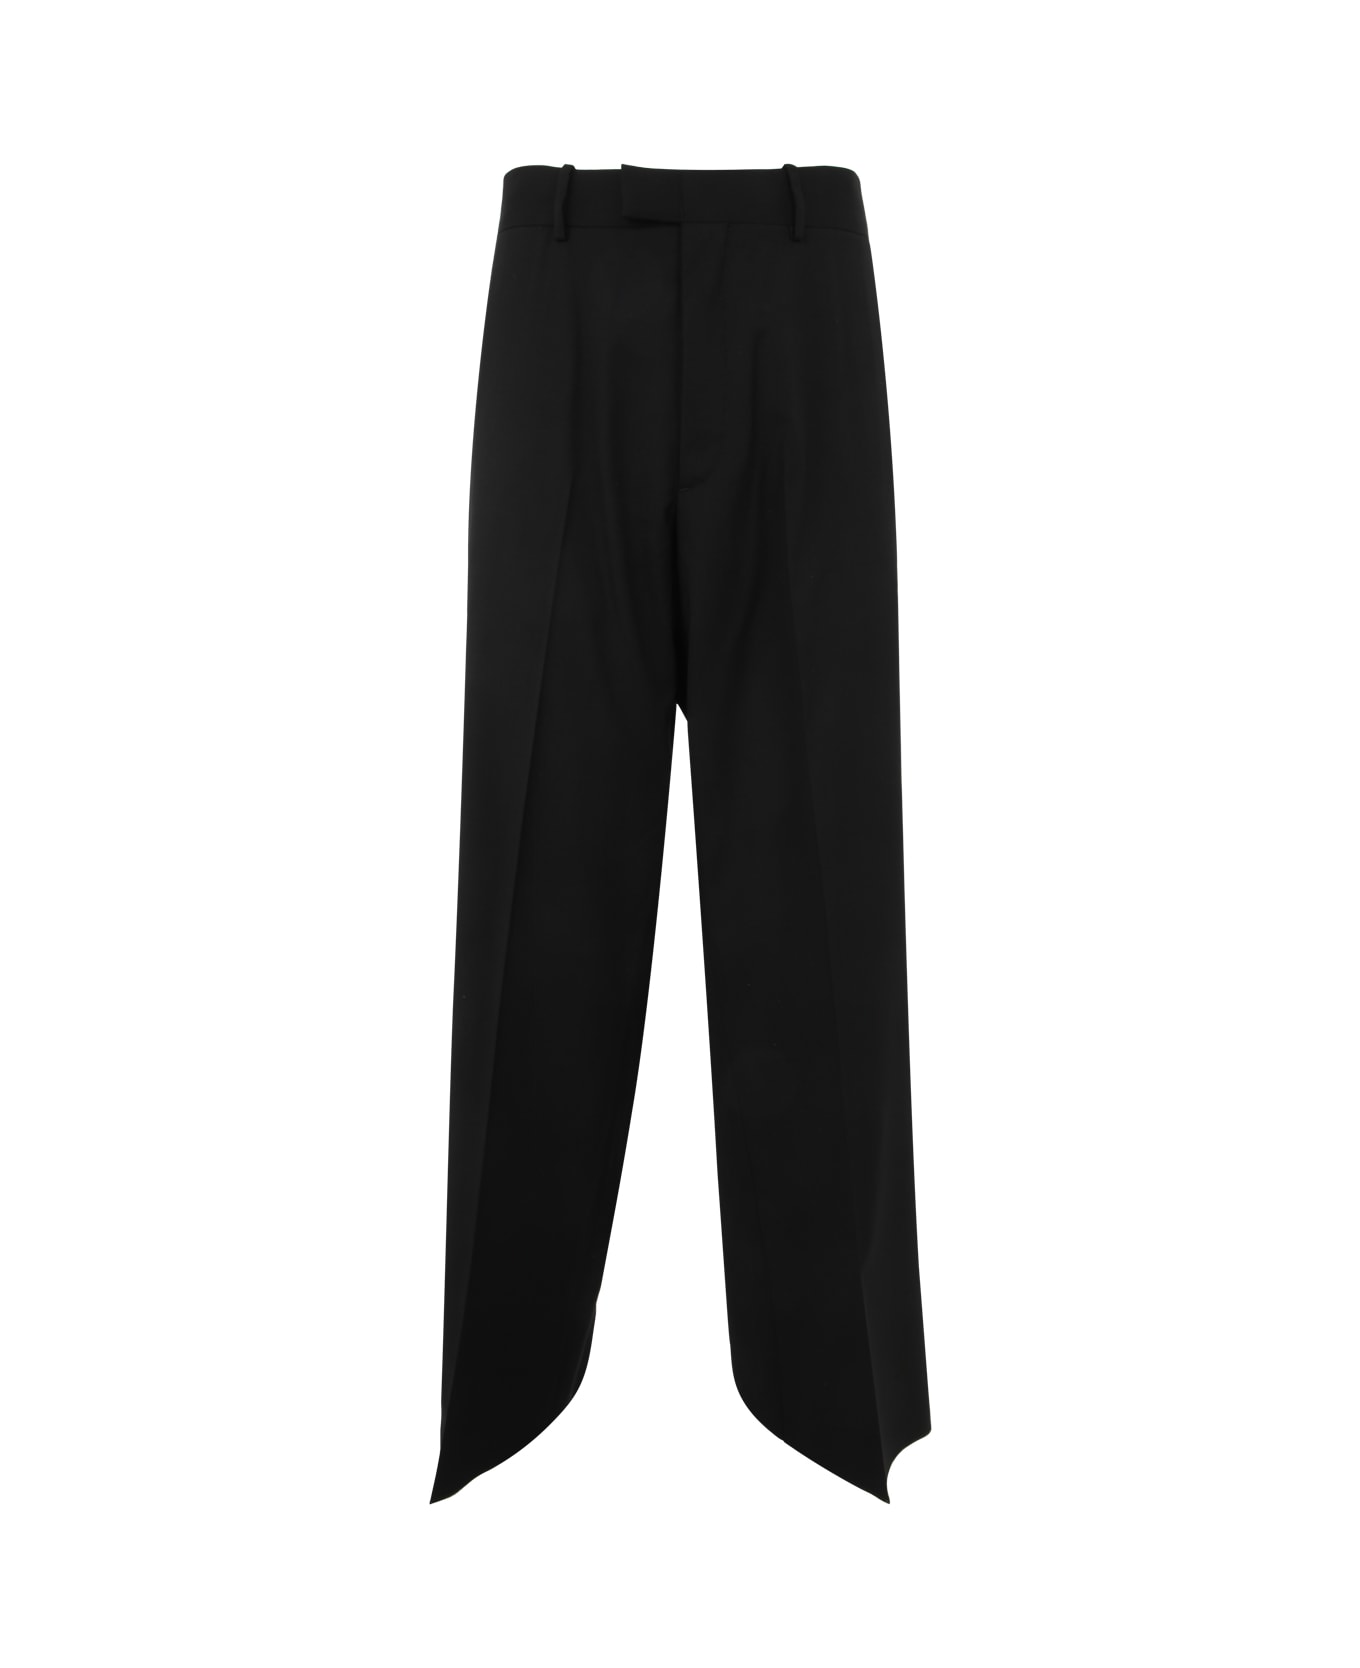 Raf Simons Classic Straight Pants With Two Back Pockets - Black